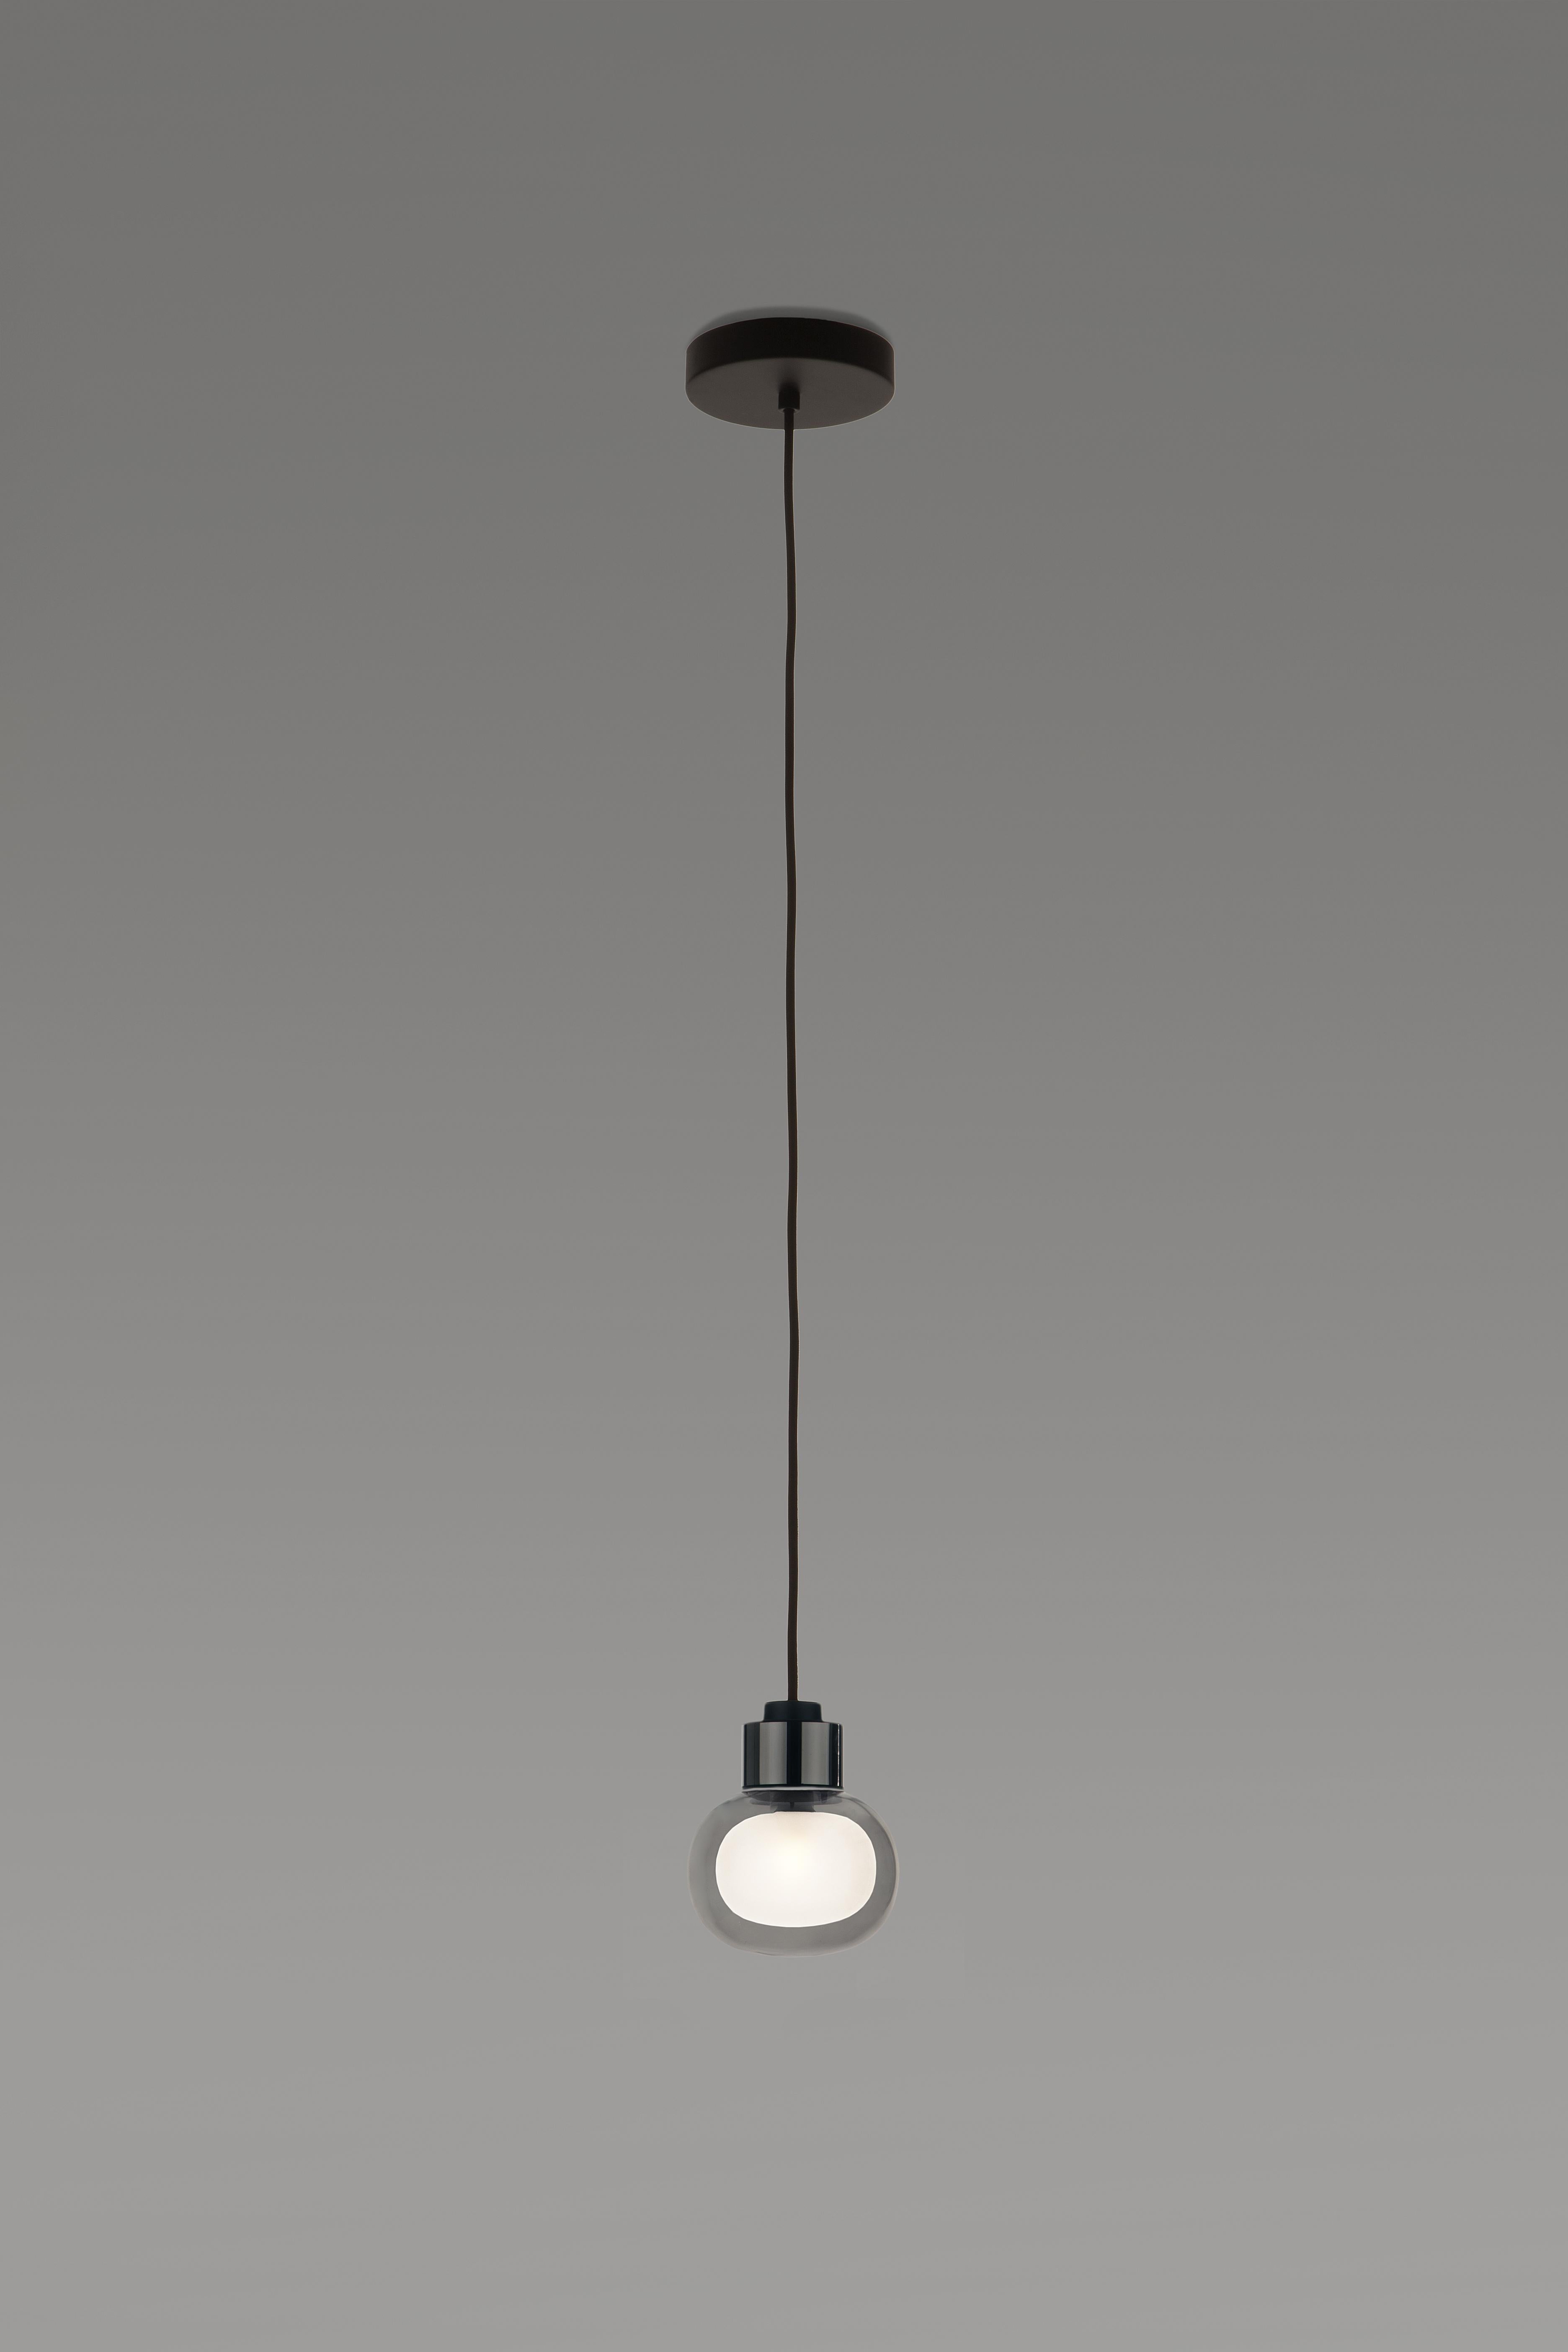 Contemporary Pendant Lamp 'Nabila 552.21' by Tooy, Black Chrome, Smoked Glass For Sale 2